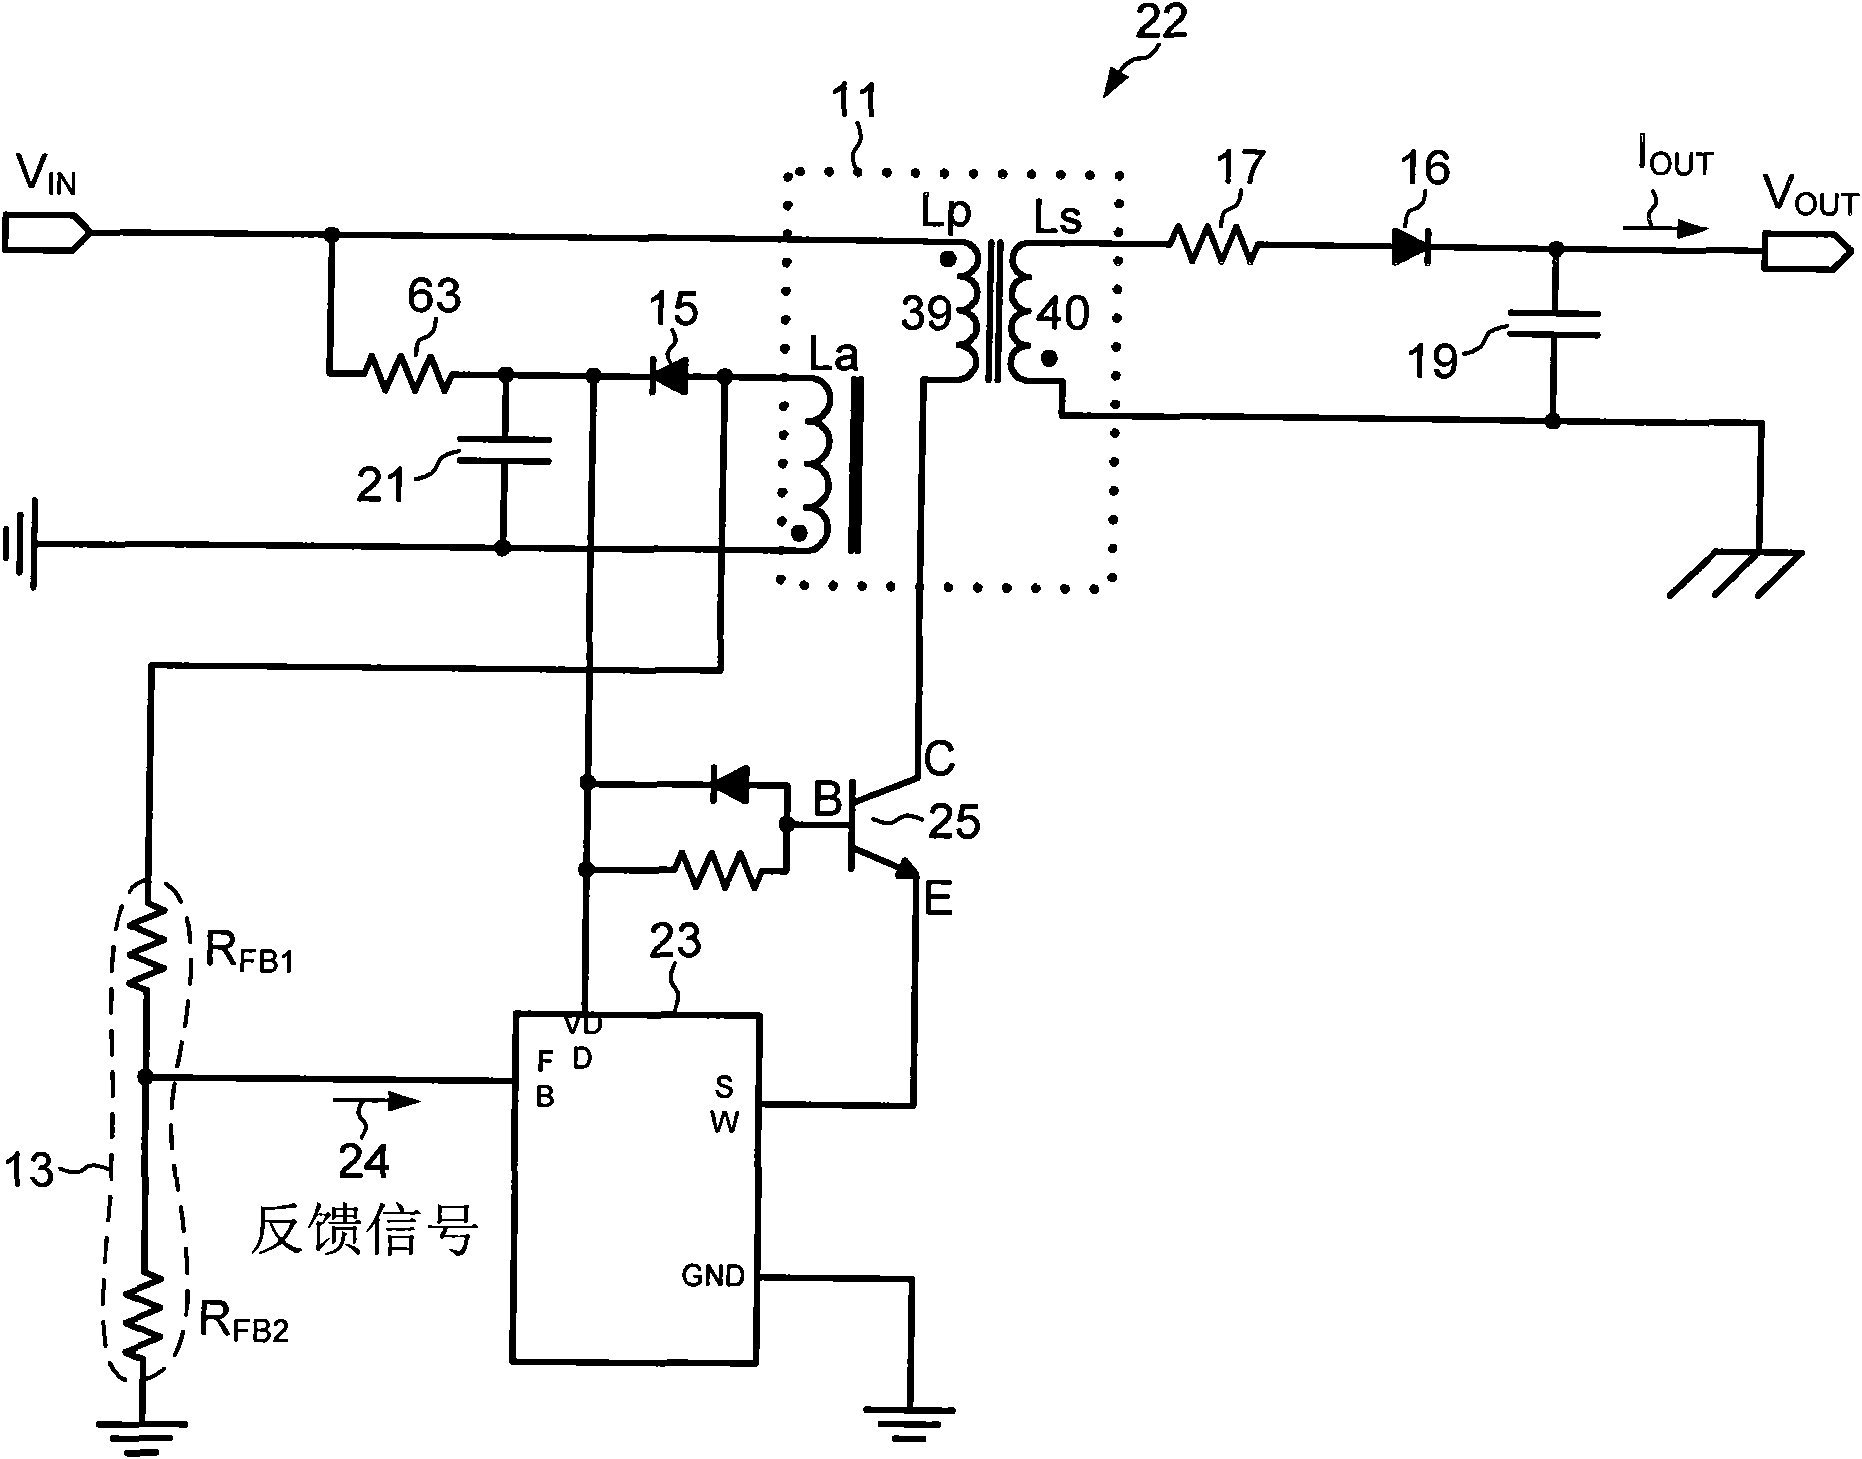 Constant current and voltage controller carrying out pin multiplexing and a three-pin package